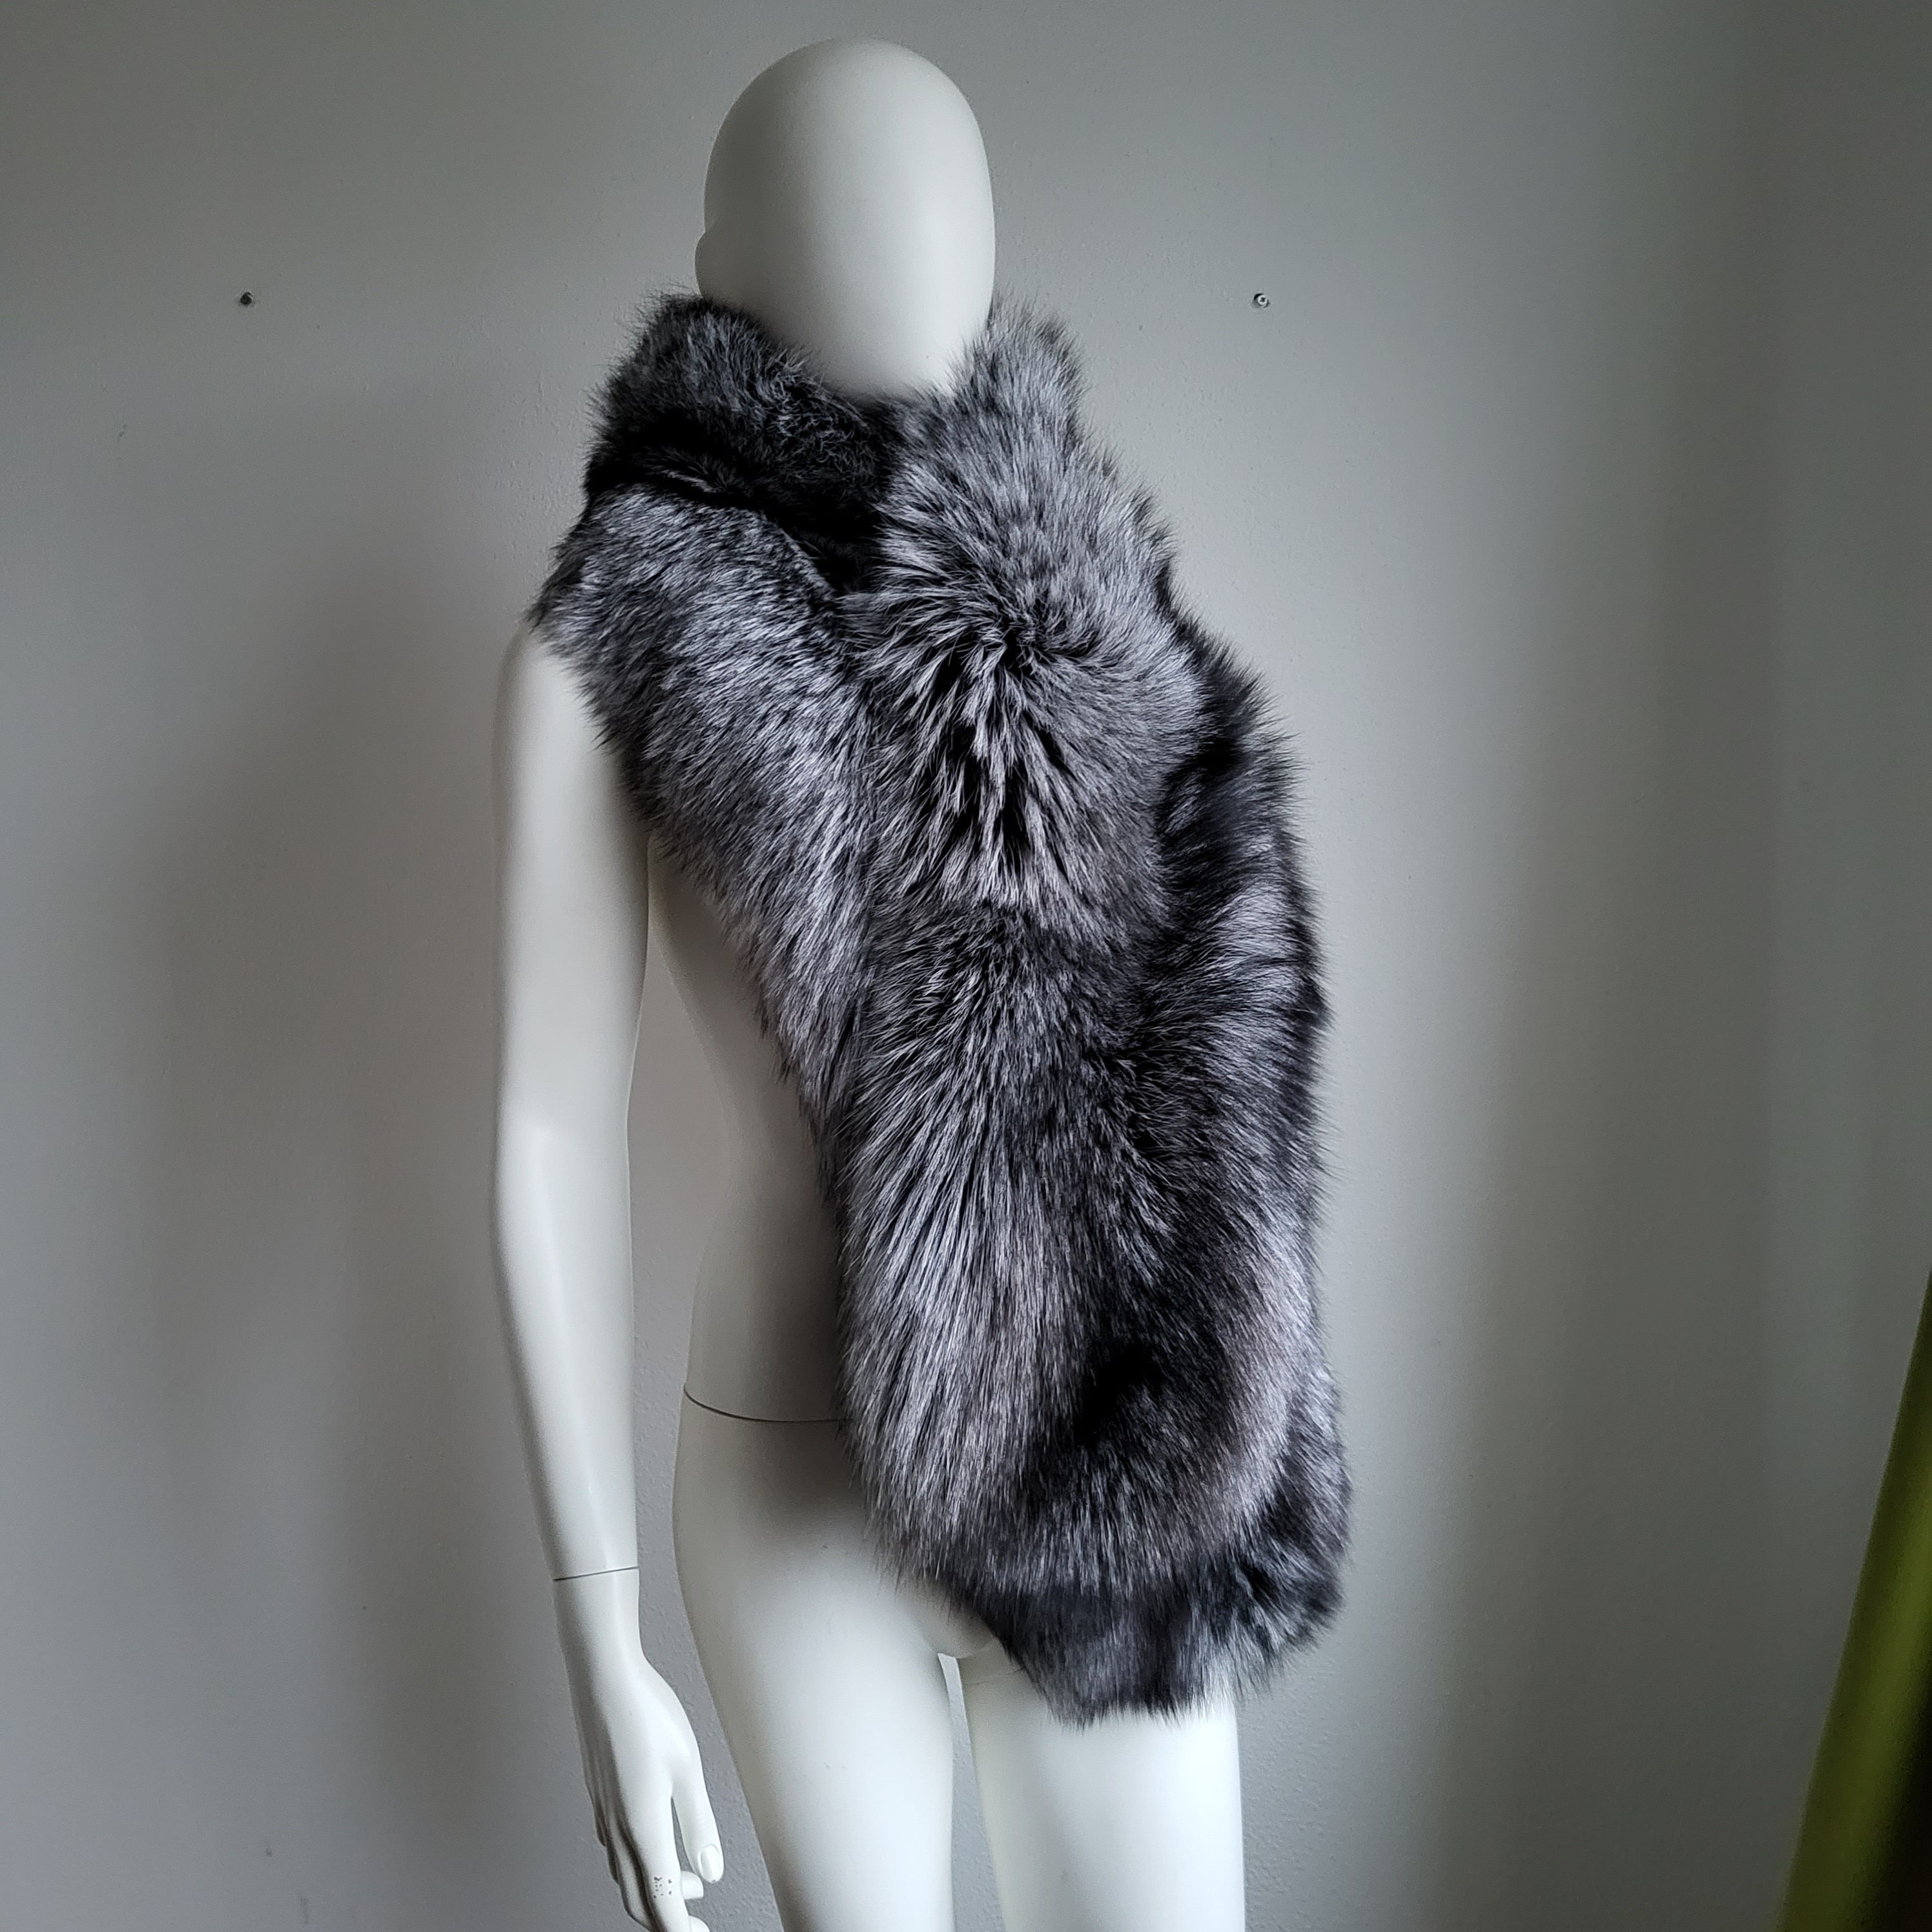 Vintage 1930s Silver Fox Fur Stole Wrap Shoulder Shrug with Head and - Ruby  Lane